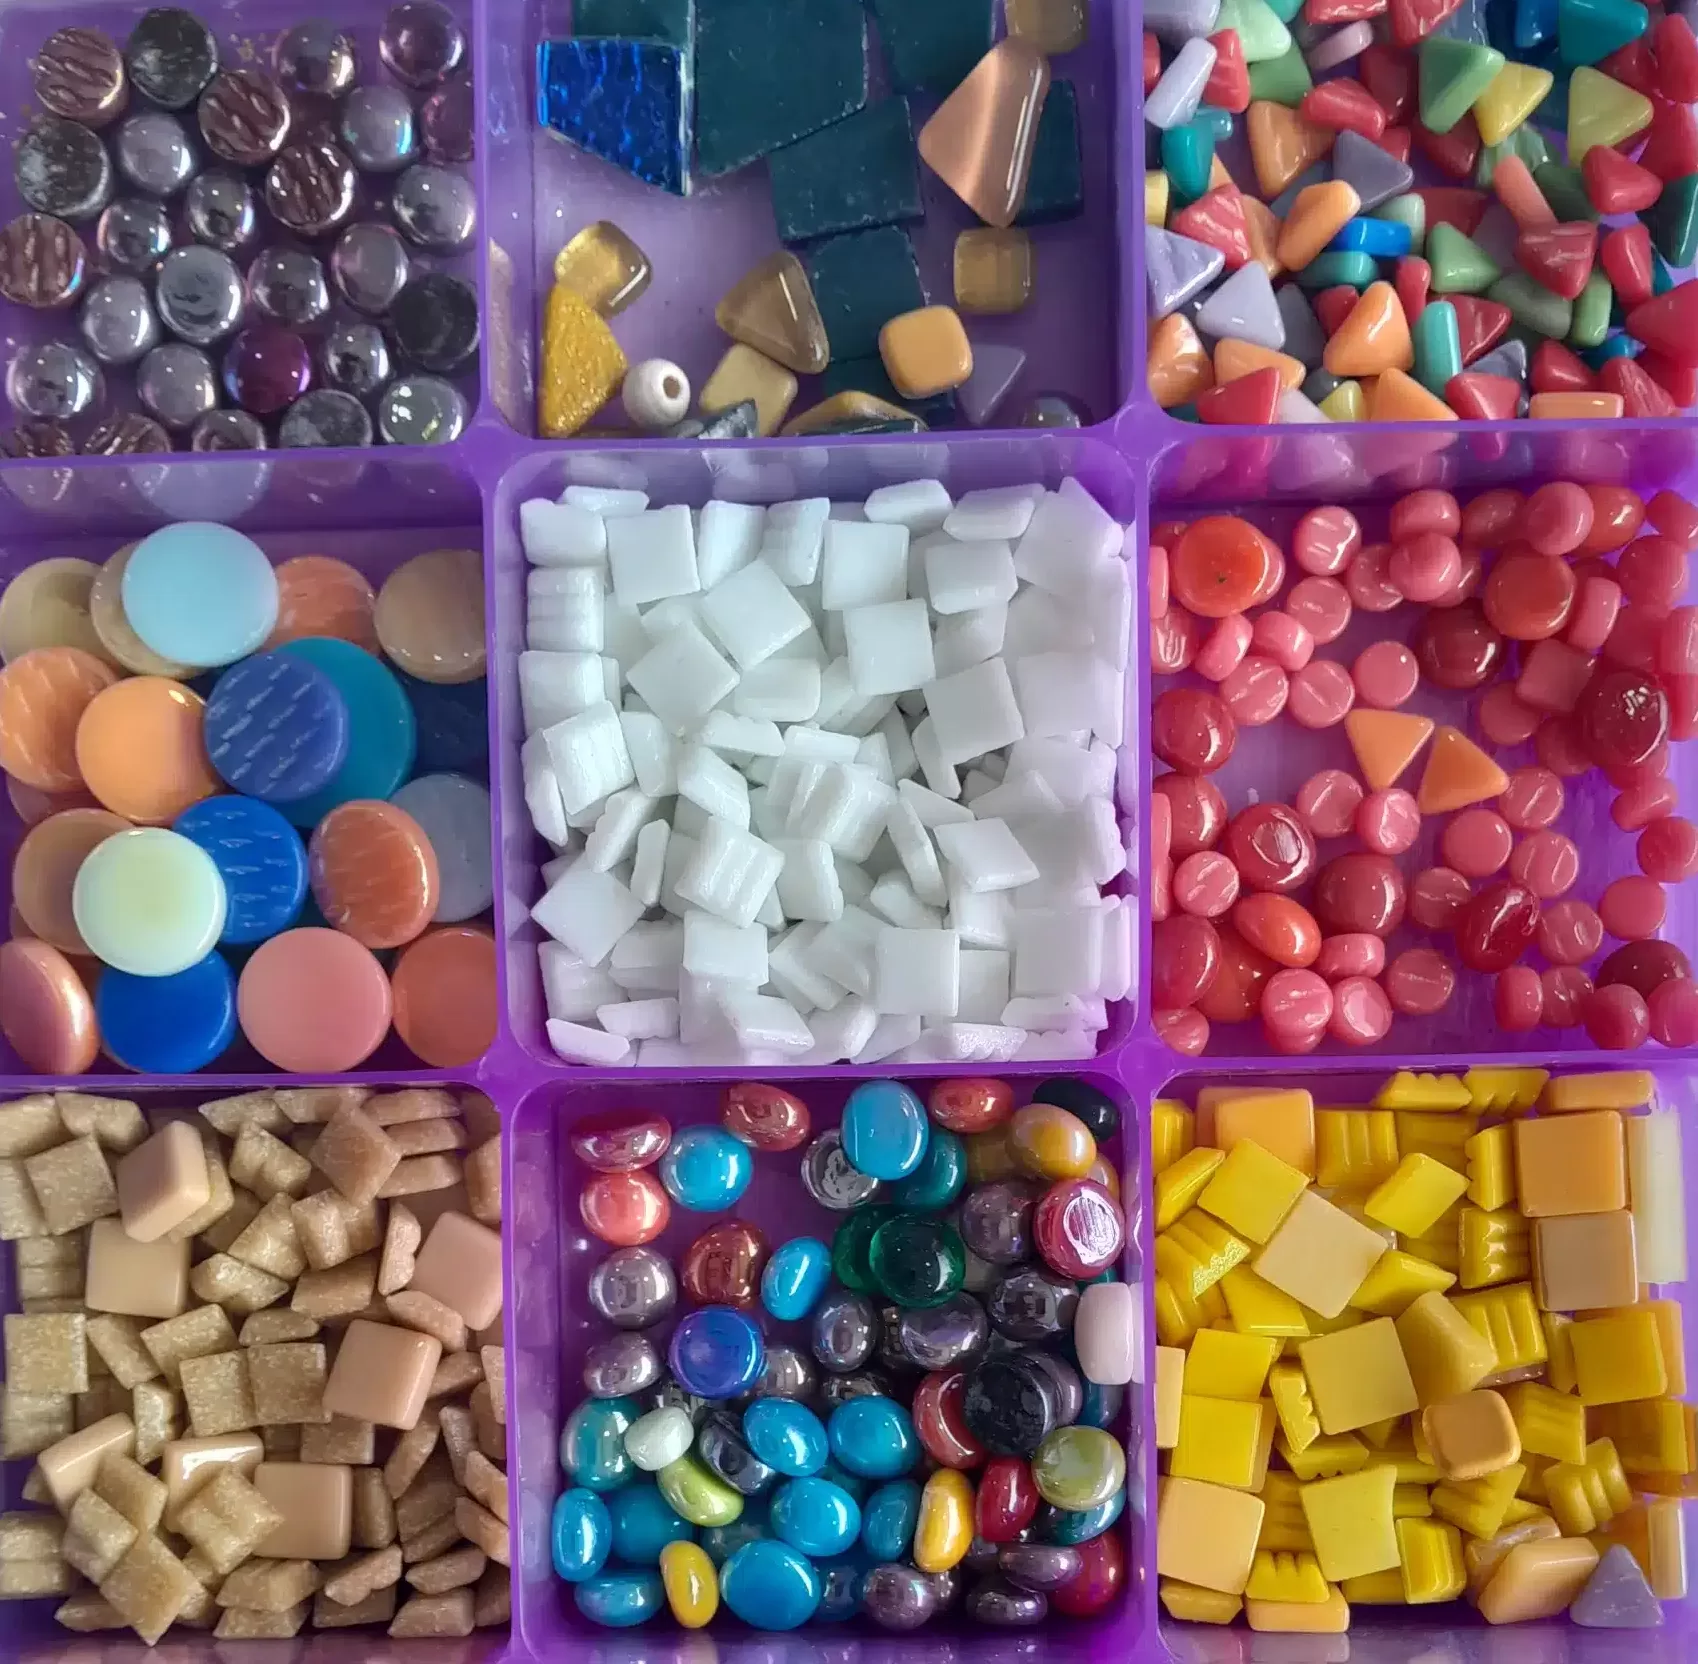 How to Make a Mosaic: Supplies and Tools